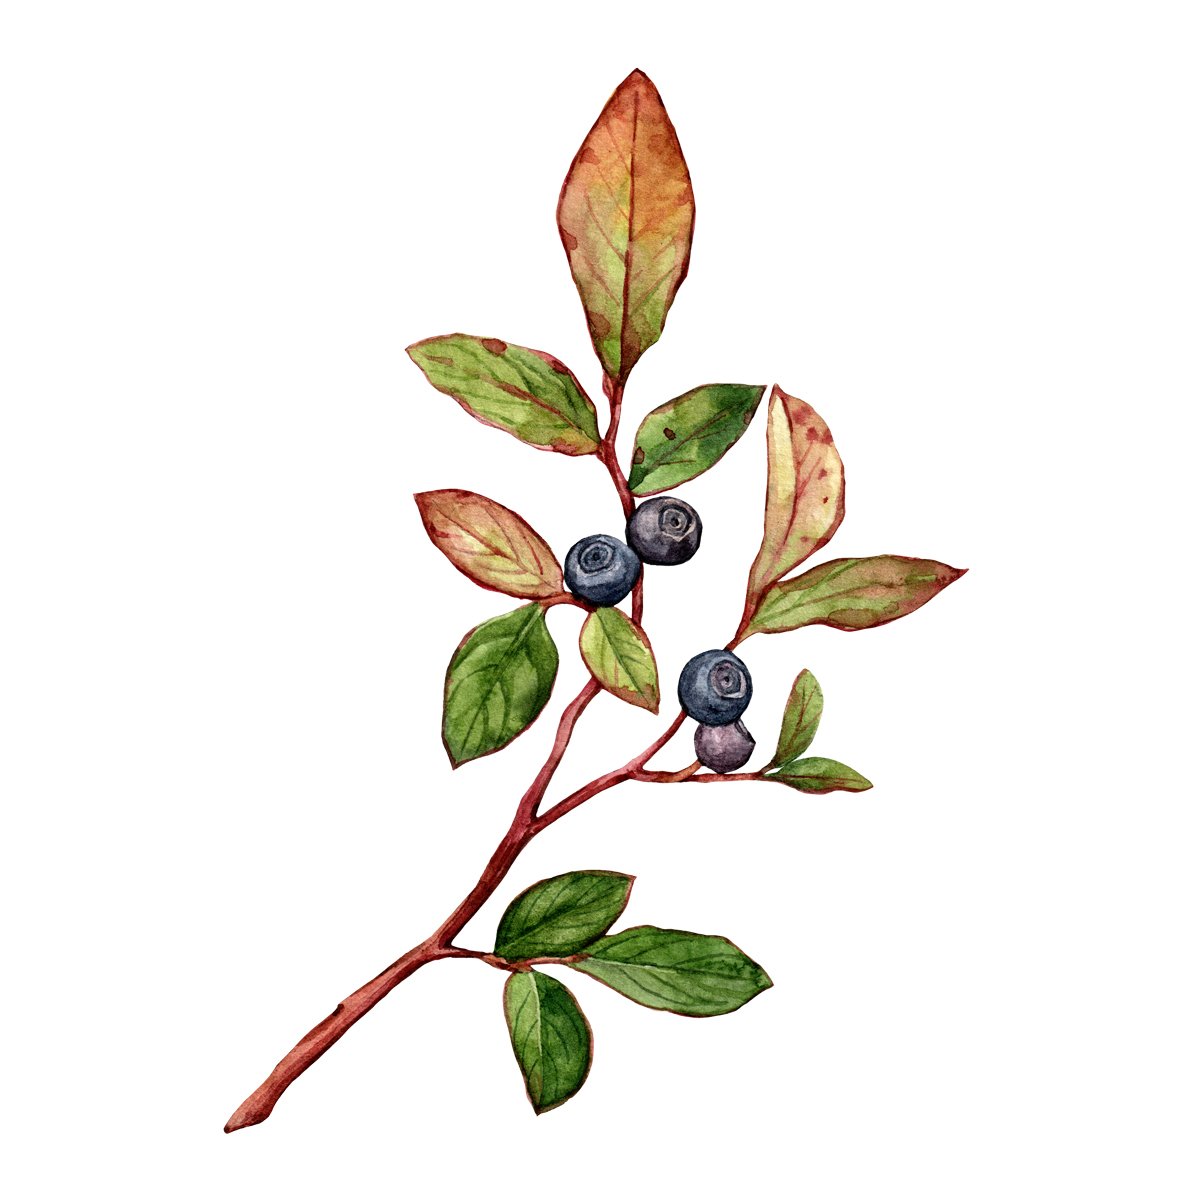 Huckleberry, the Very Wild Berry: A Tasty National Treasure – Whistling Andy